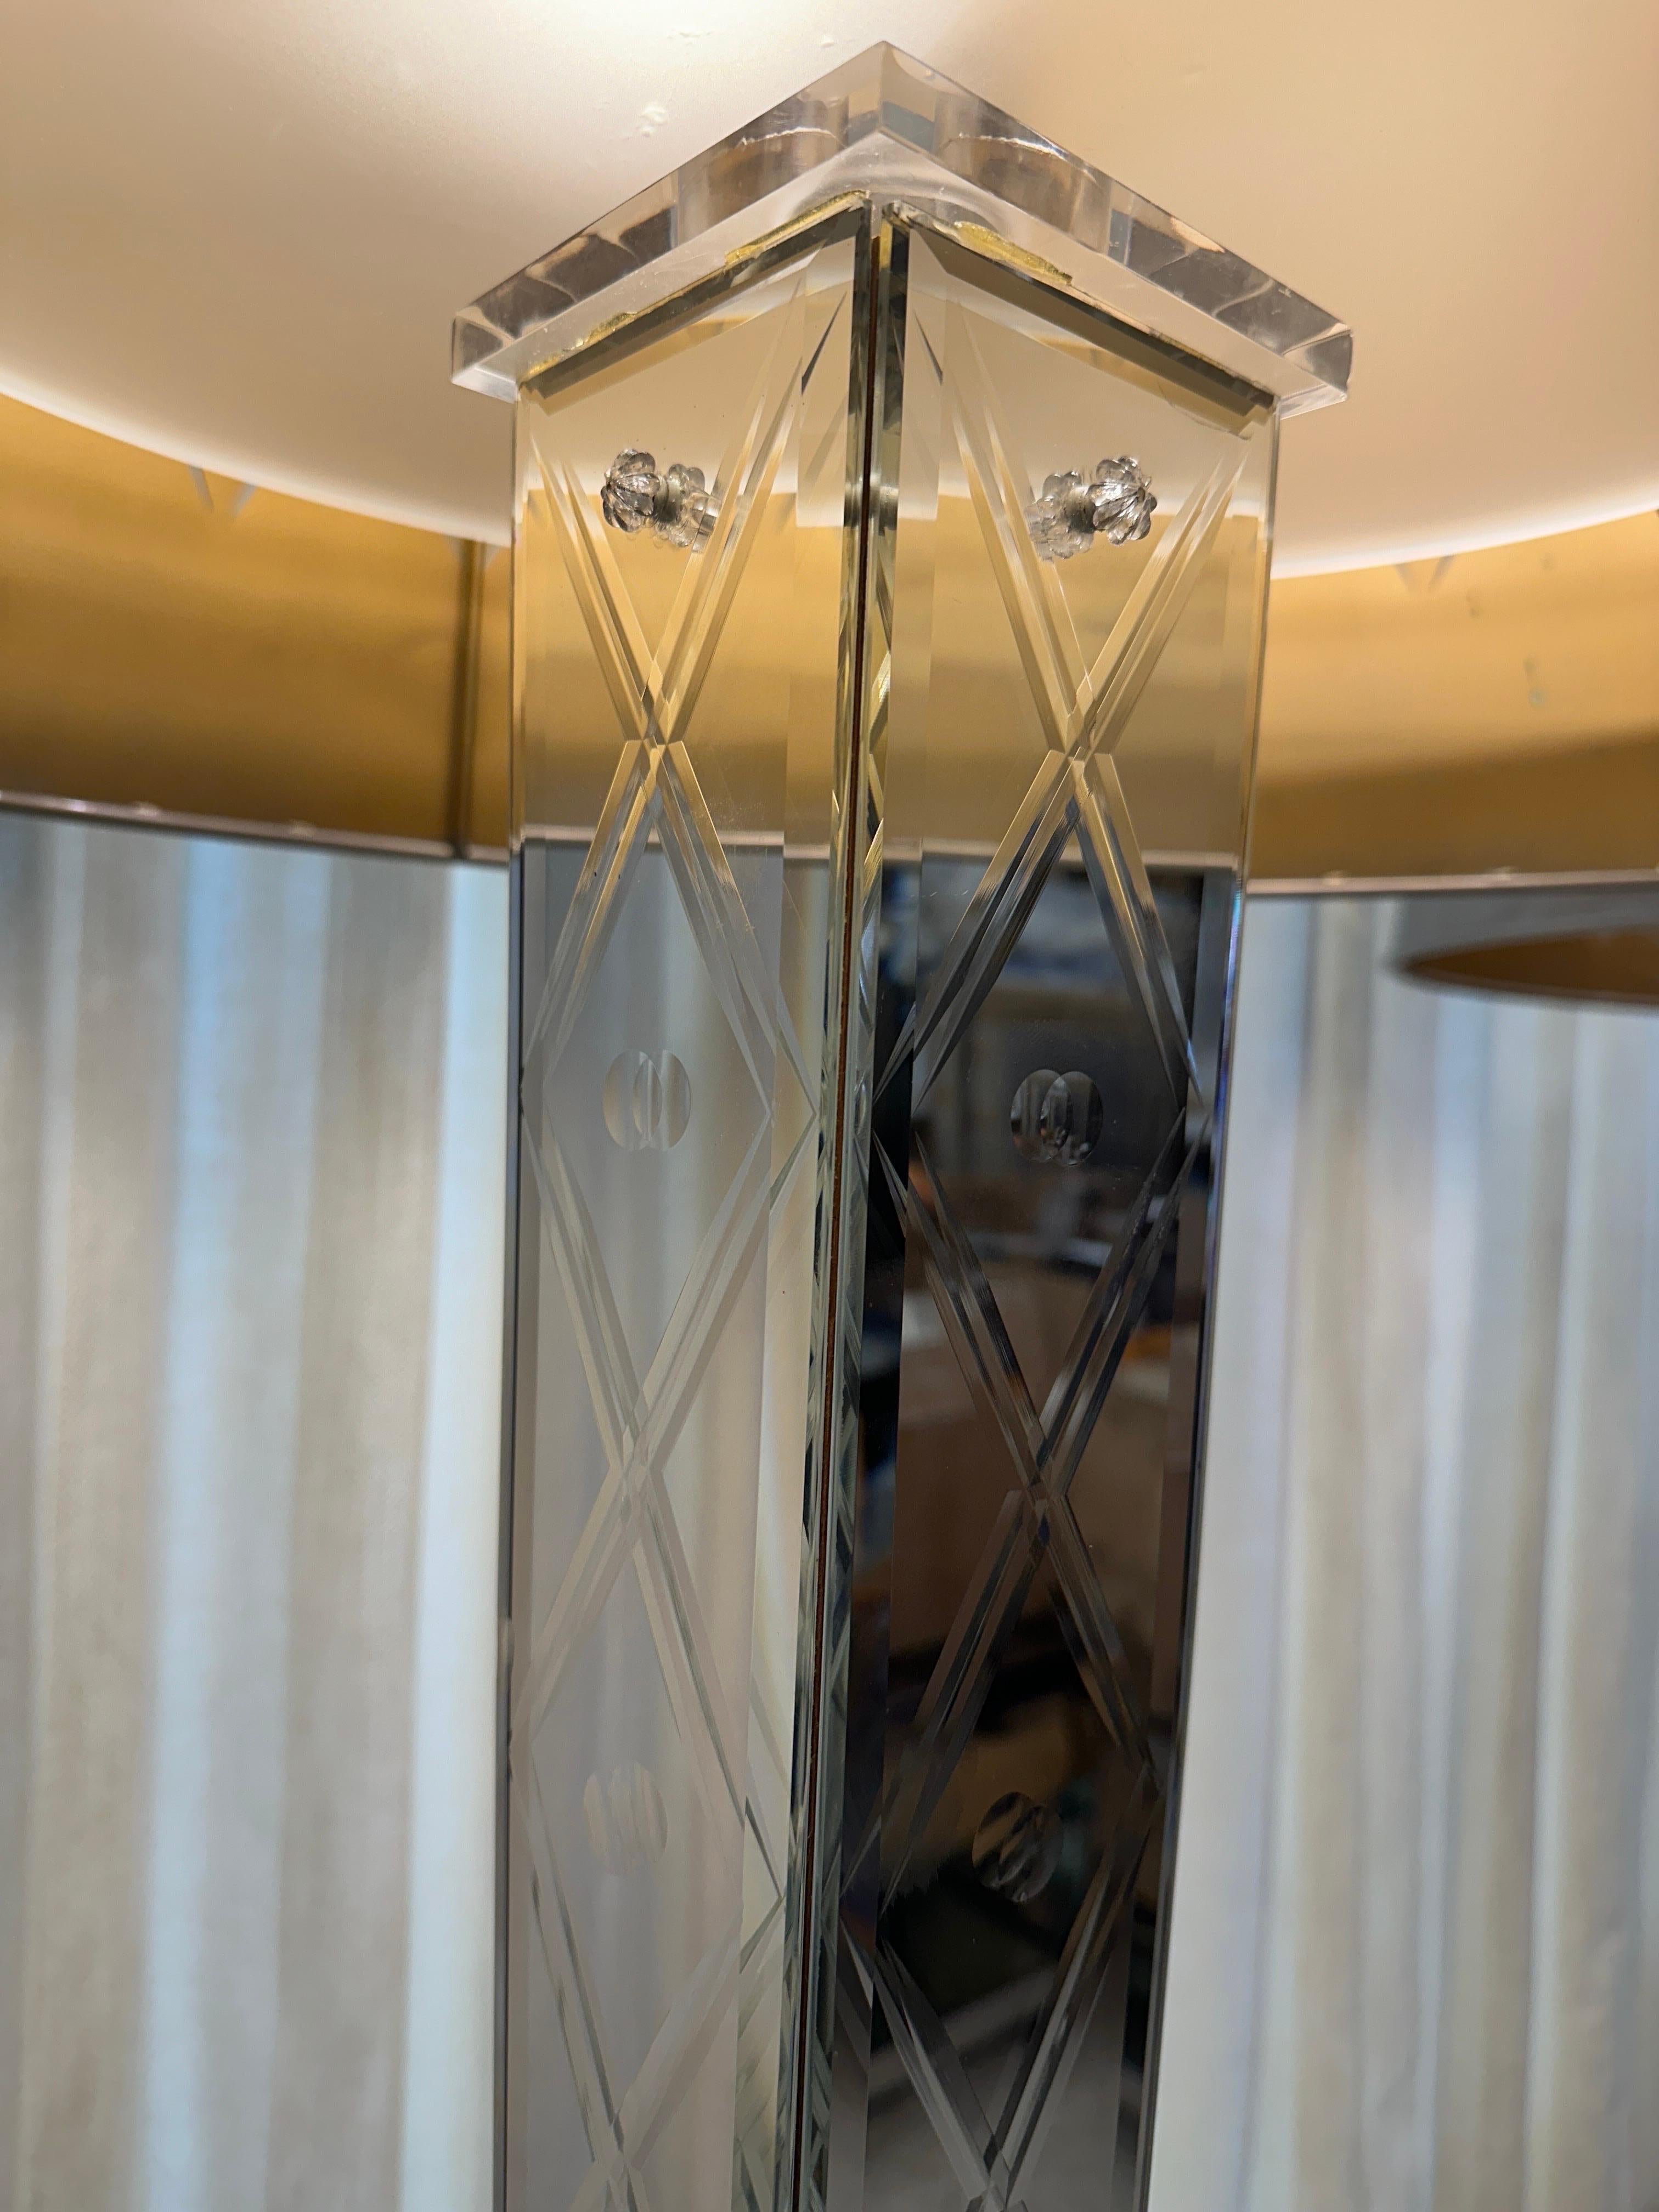 RARE Pair of Philippe Starck Mirror Floor-Lamps - Delano Hotel South Beach For Sale 2